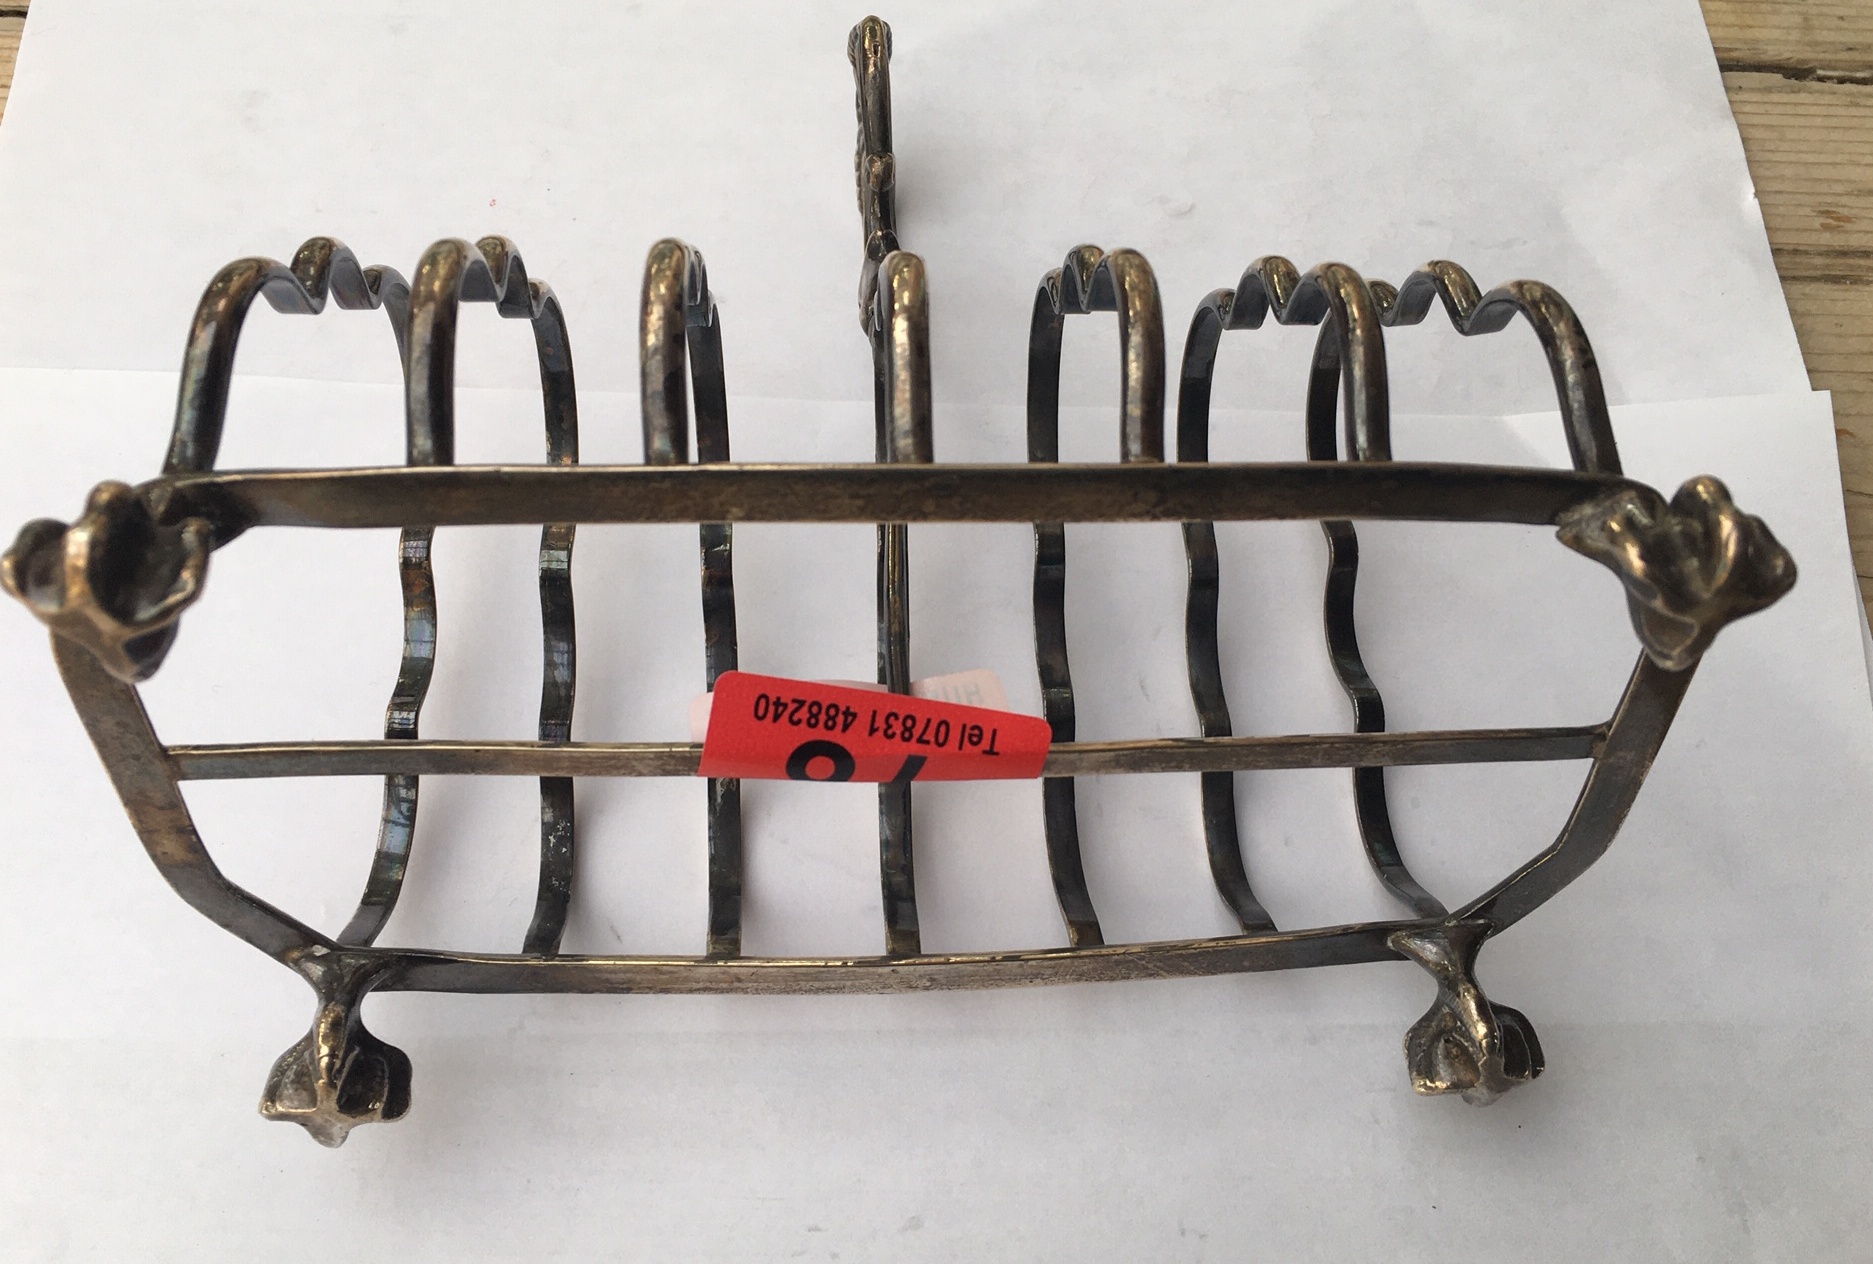 Antique Victorian 6 Slice Silver Toast Rack - 7" long and 6 1/2" tall - 312 grams. - Image 5 of 5